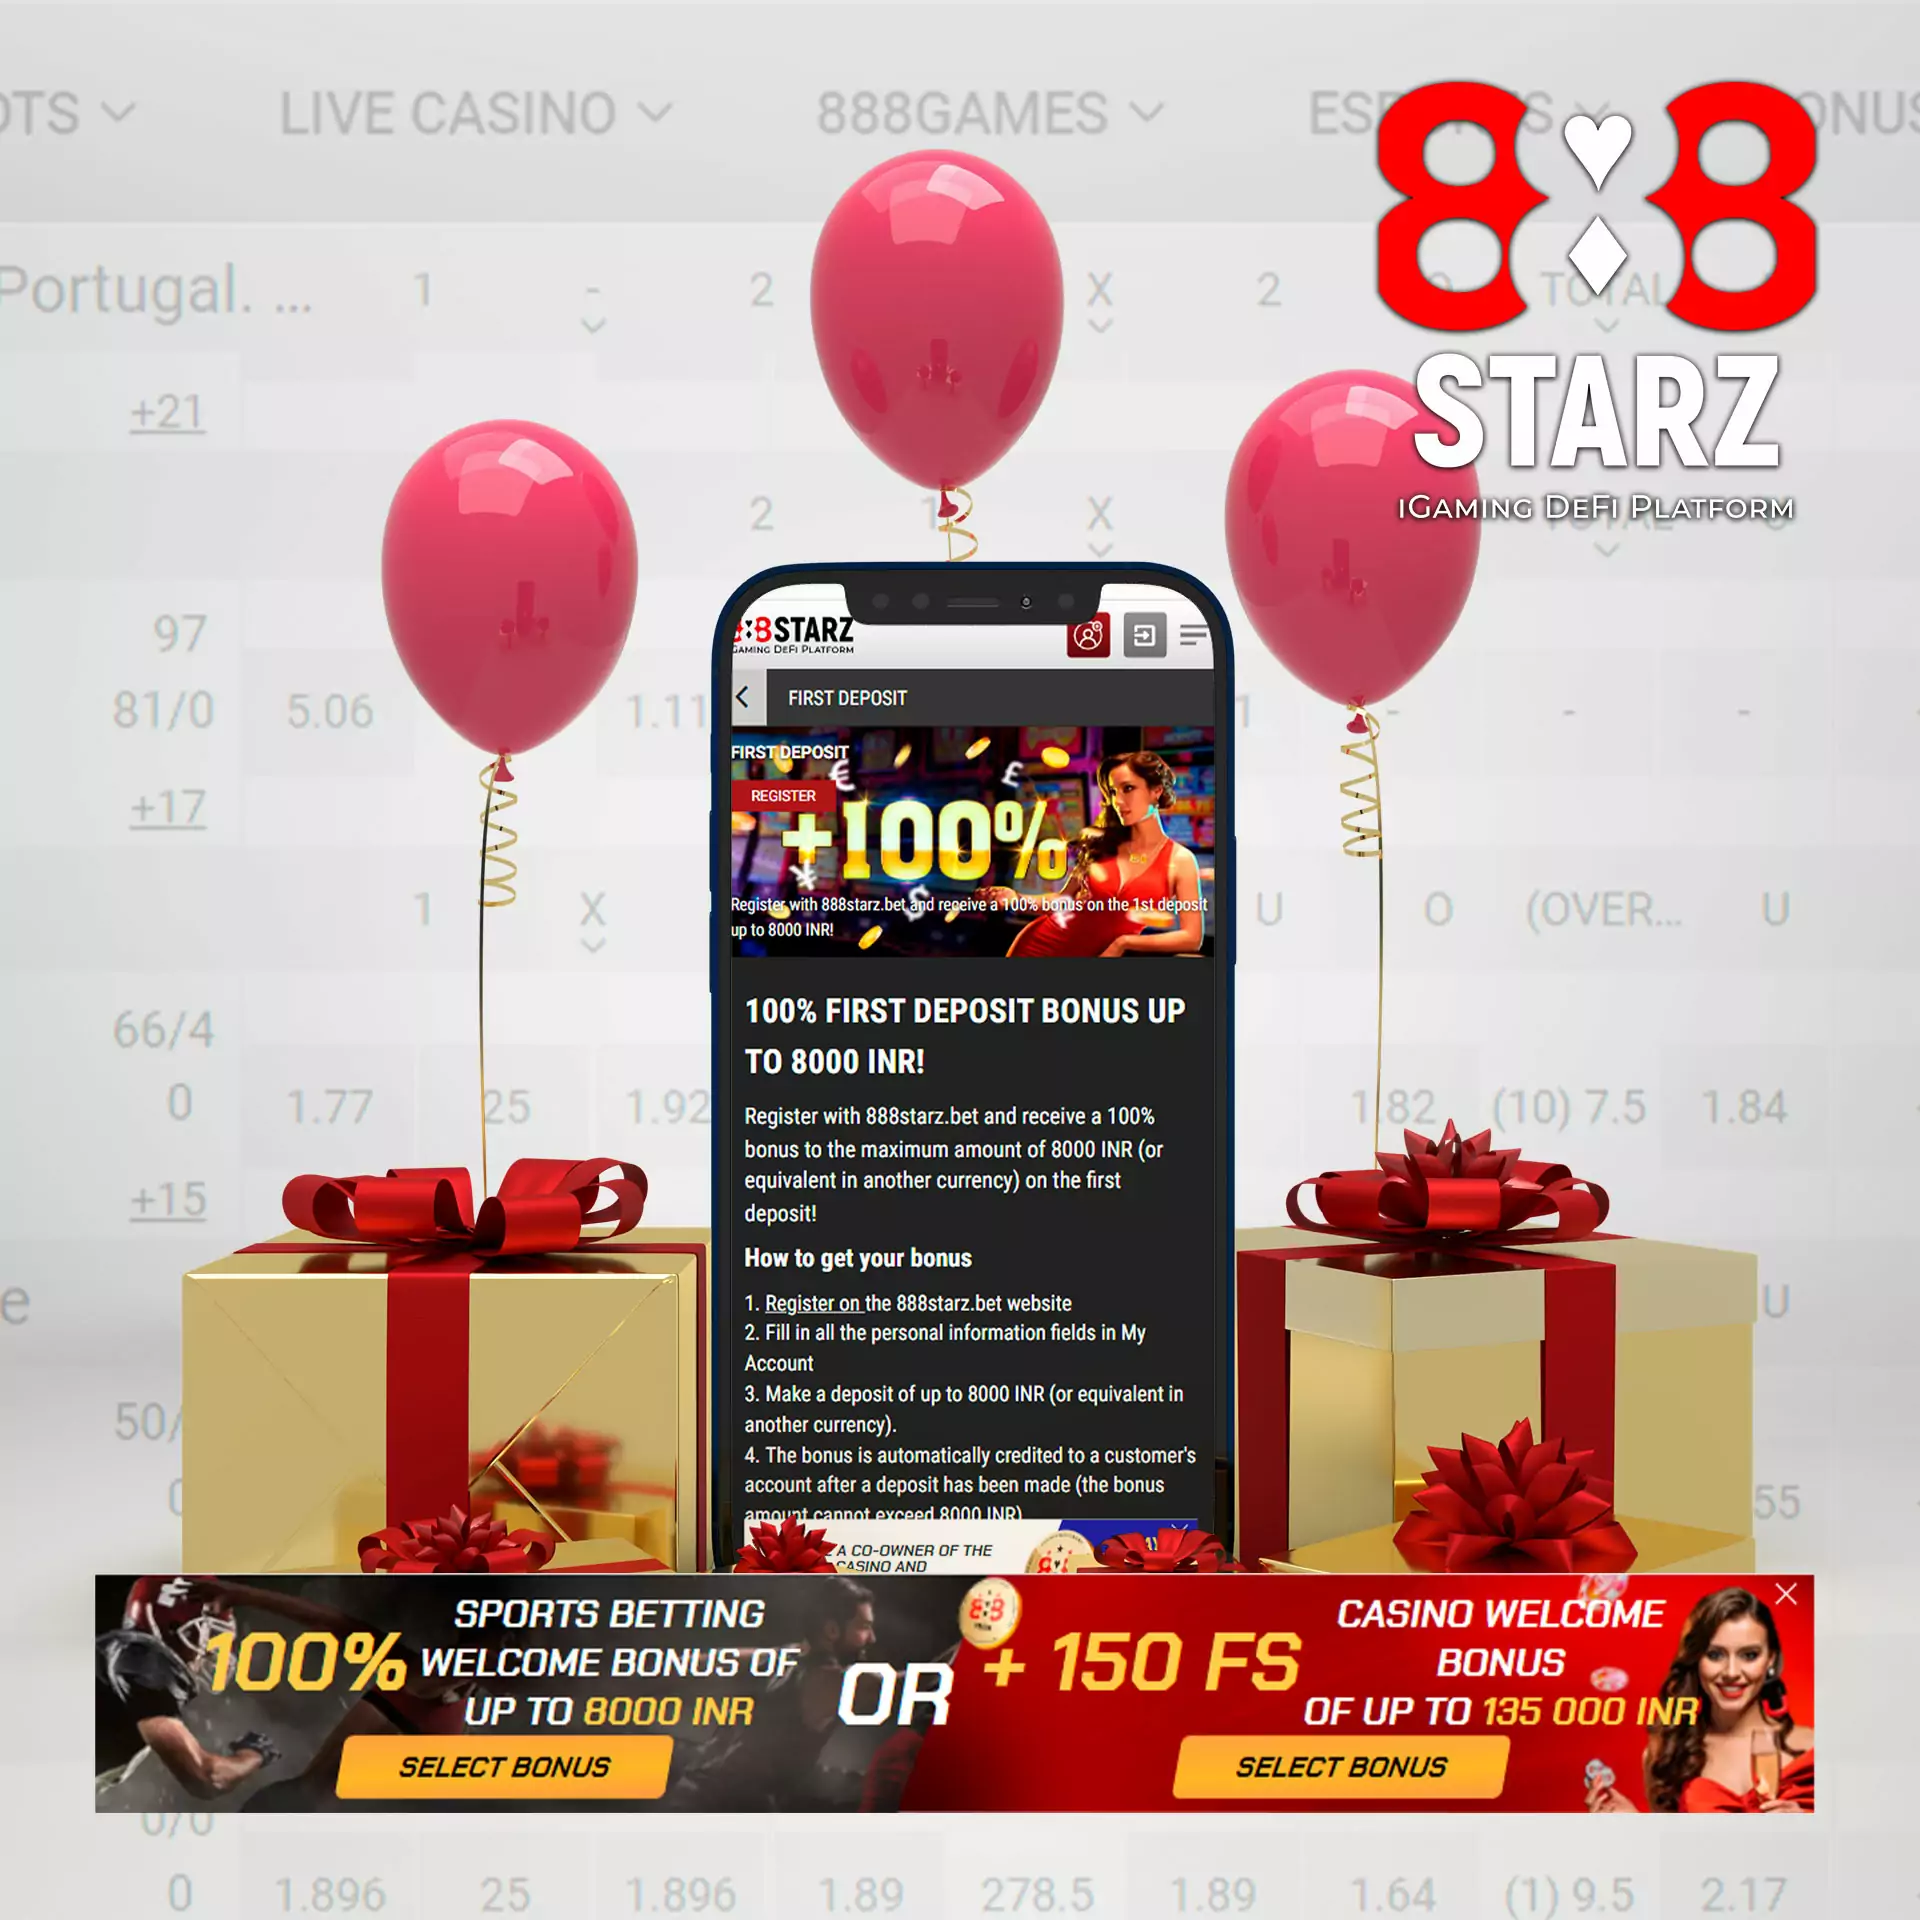 888starz is giving a welcome bonus of INR 8,000 to new users.